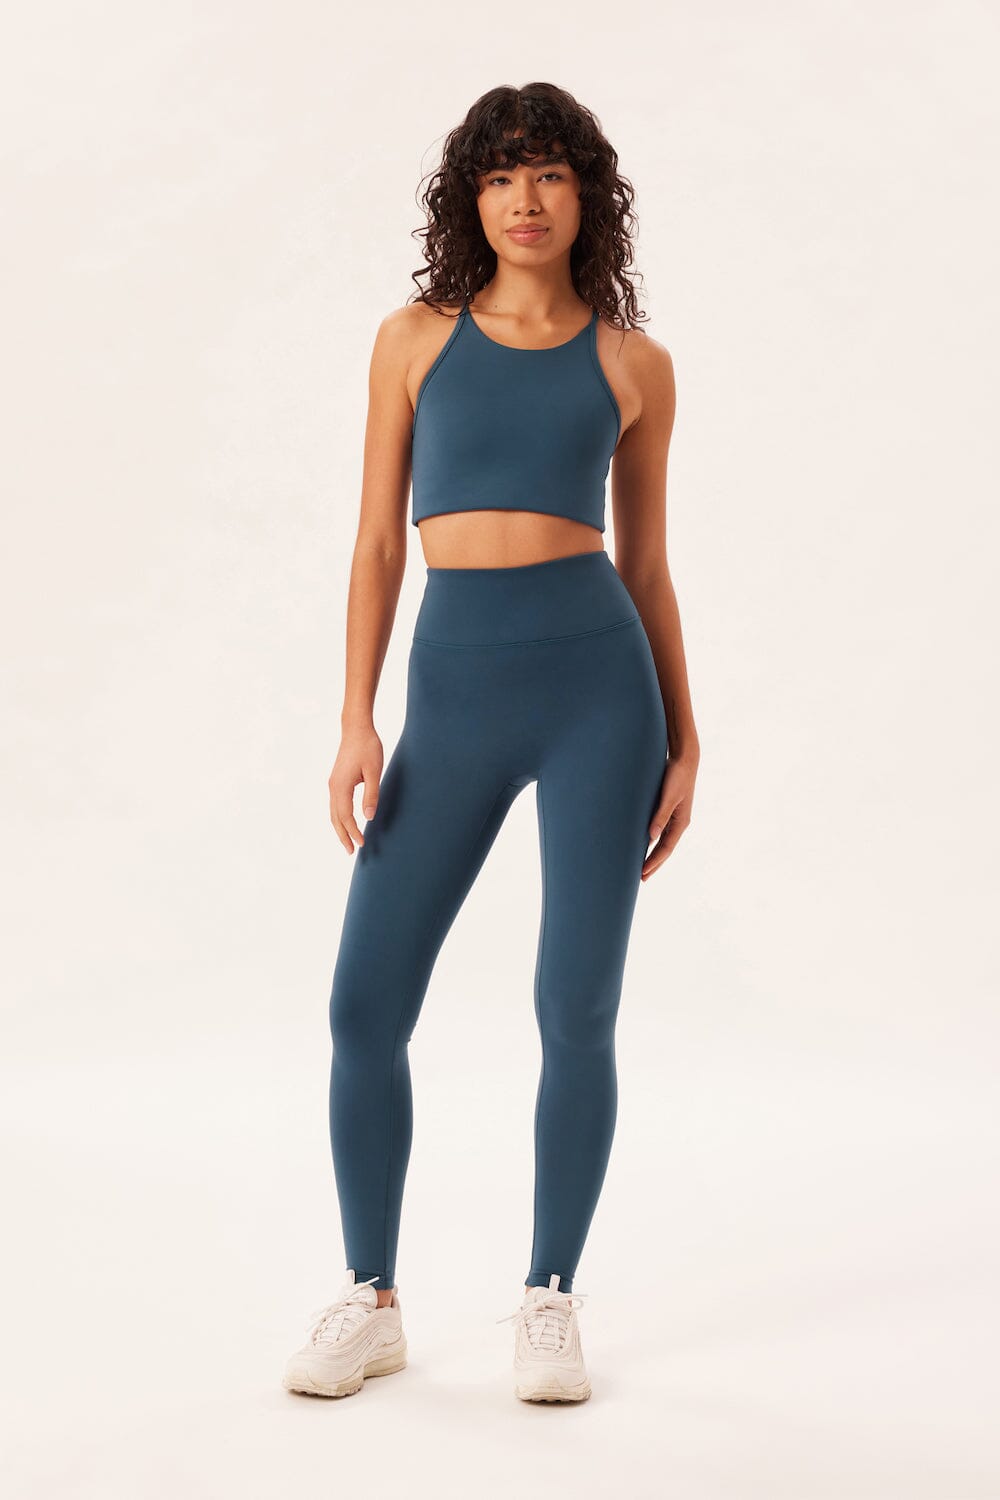 Girlfriend Collective LUXE Leggings - Recycled PET Lago XXL Pants